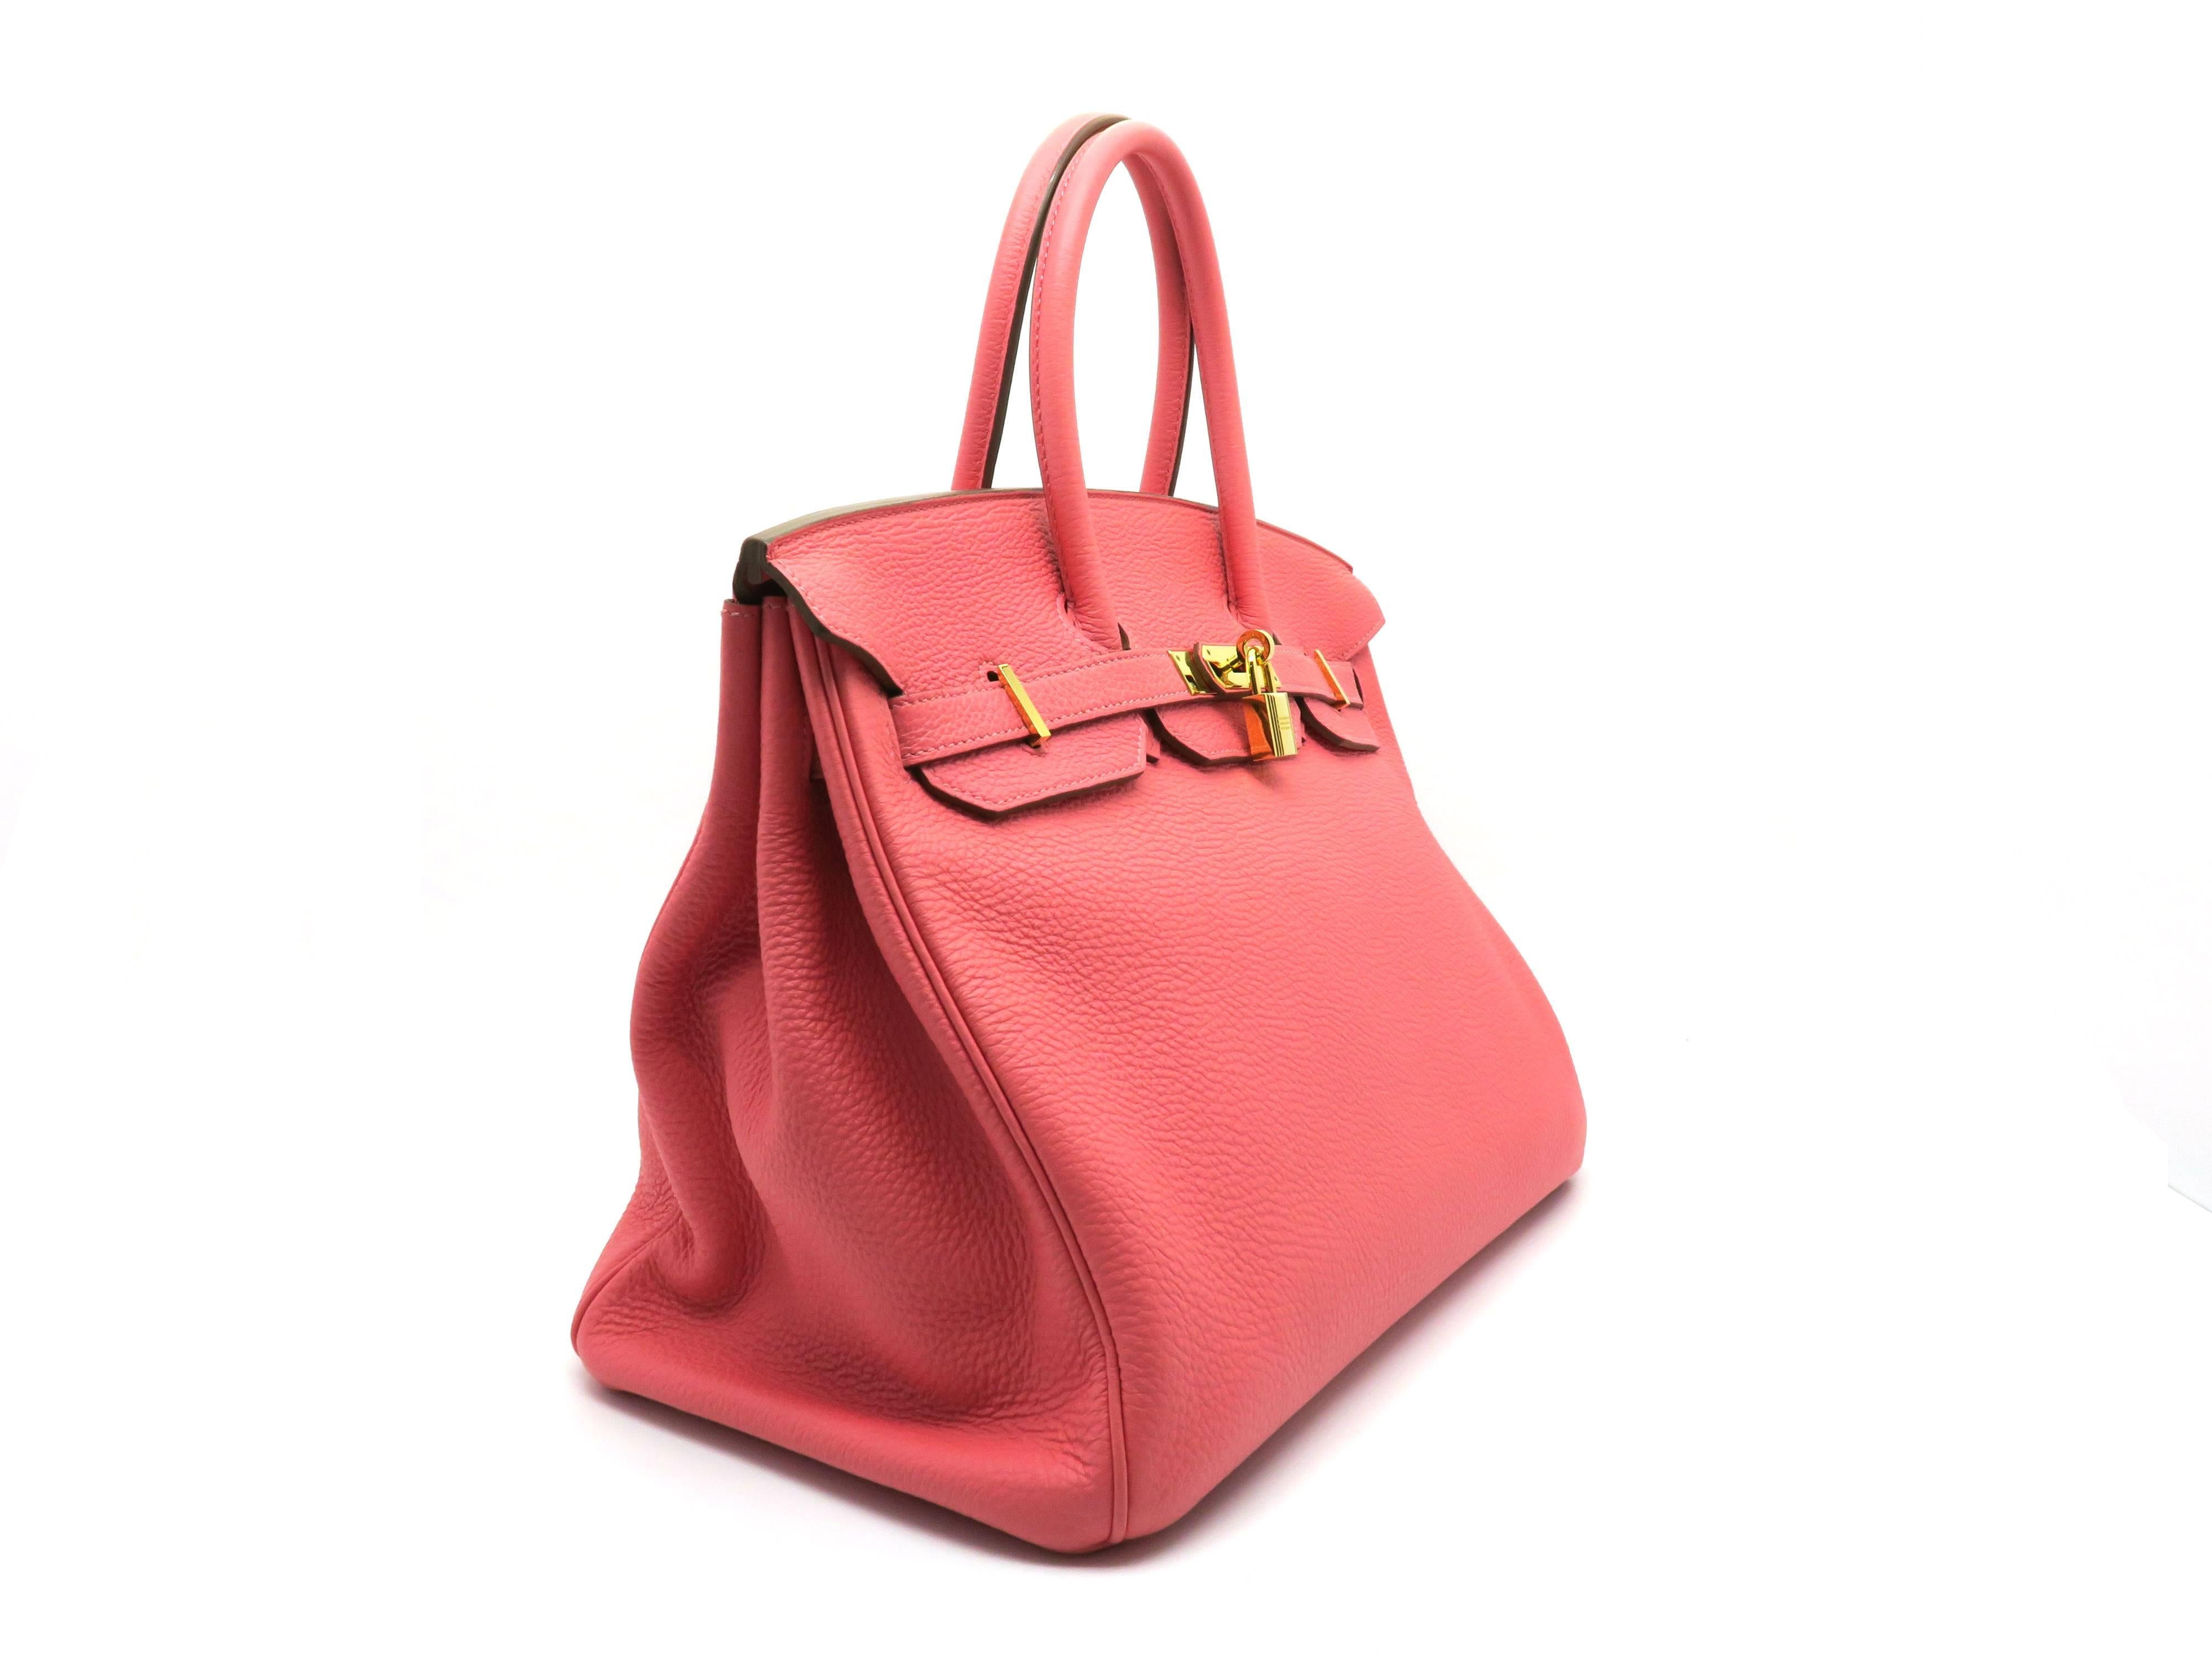 Color: Coral / Rouge Pivoinve (designer color) 

Material: Togo Leather 

Condition: Rank A 
Overall: Good, few minor defects. 
Surface: Good 
Corners: Minor Scratches & Stains
Edges: Good
Handles/Straps: Good 
Hardware: Minor